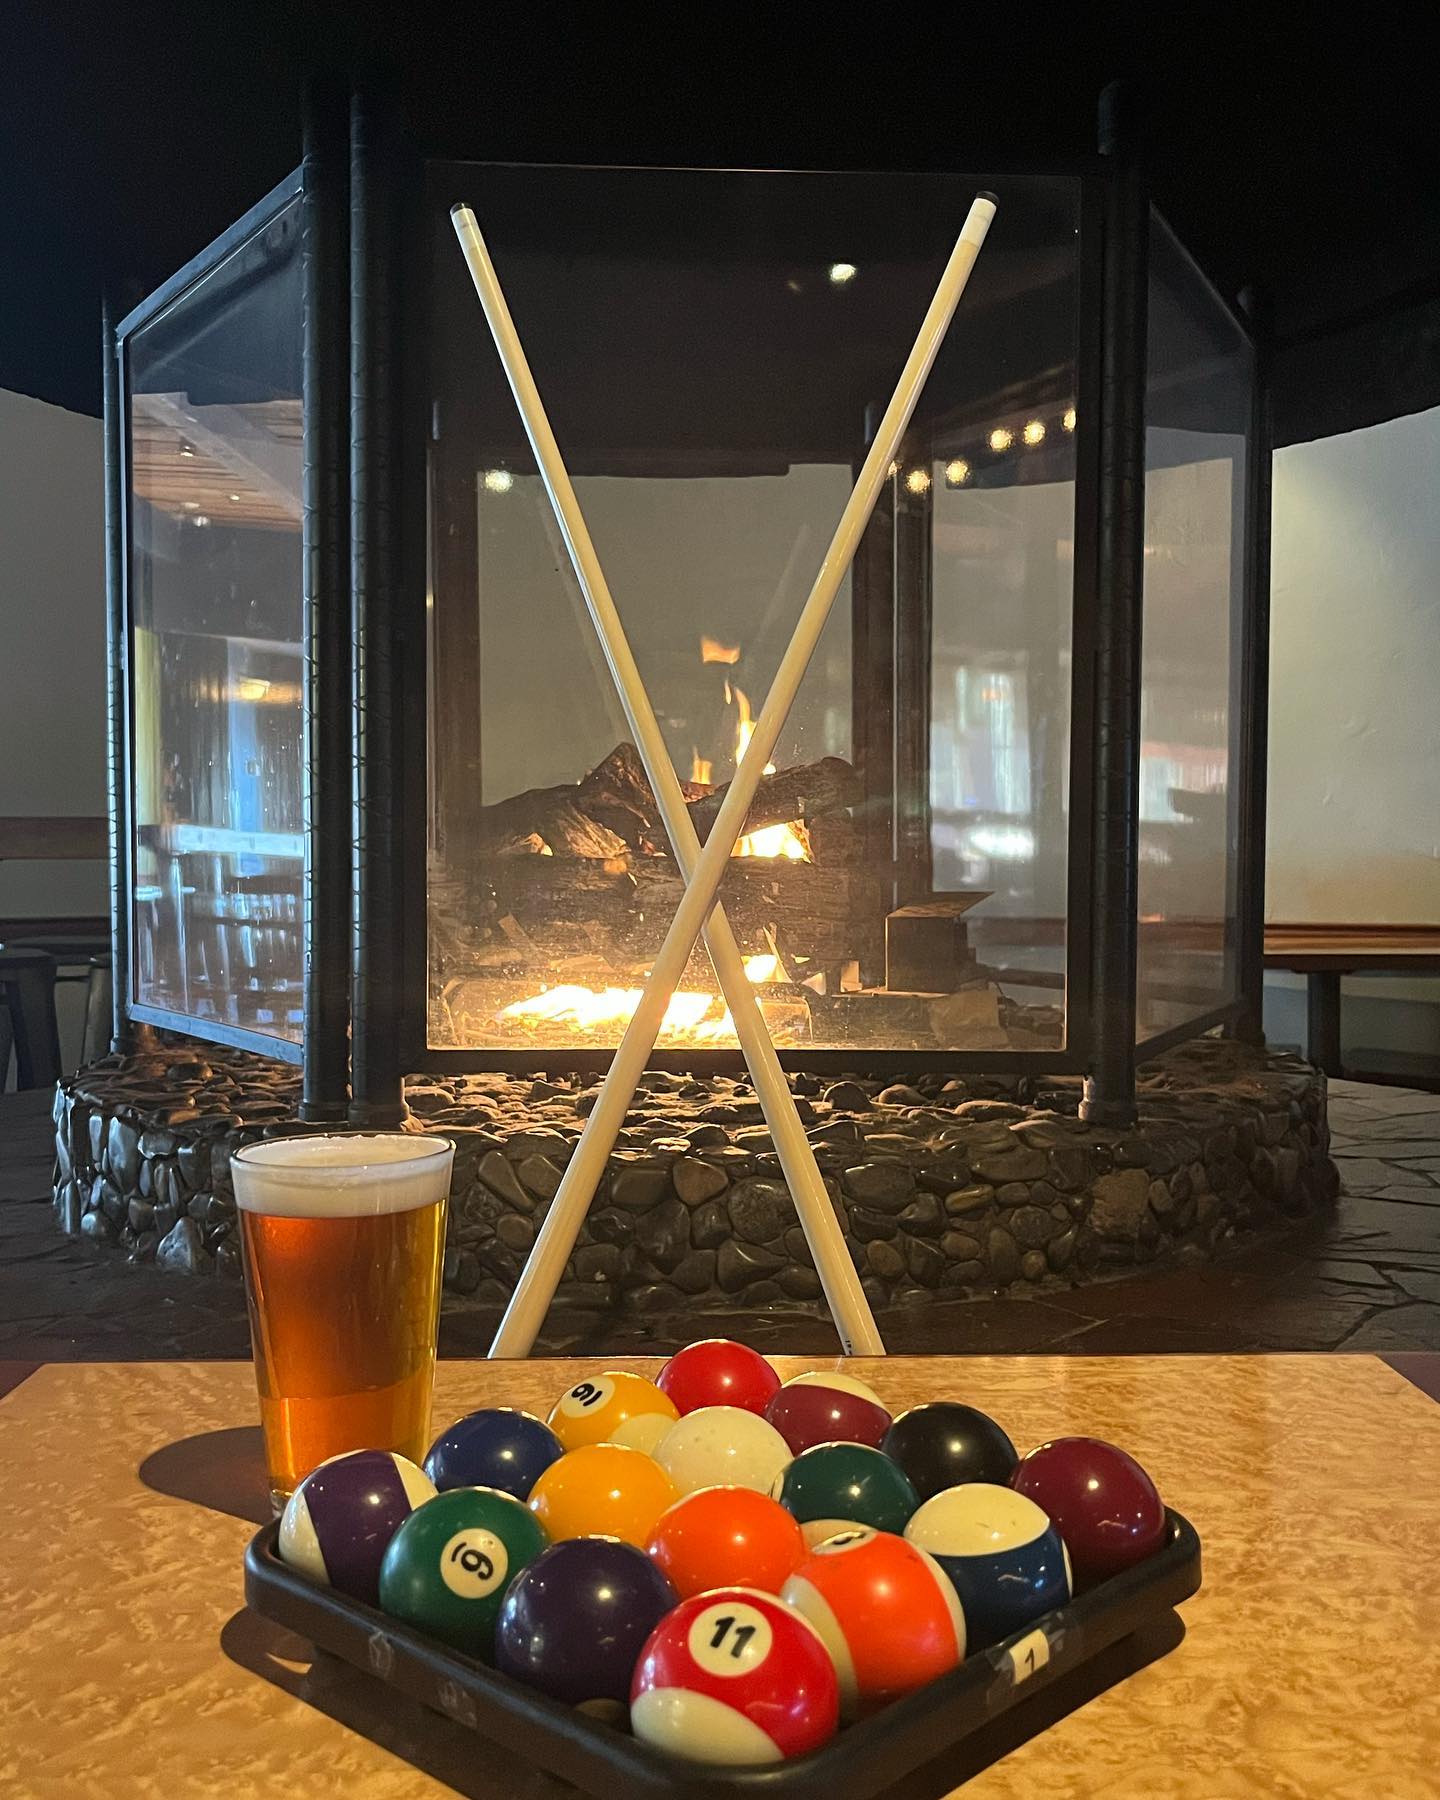 Vibrant image showcasing neatly racked pool balls at The Grizzly Grill, the ultimate destination for bar, grill, and billiards enthusiasts in Kingston. Enjoy a game of pool while savoring delicious food and drinks at our iconic establishment!